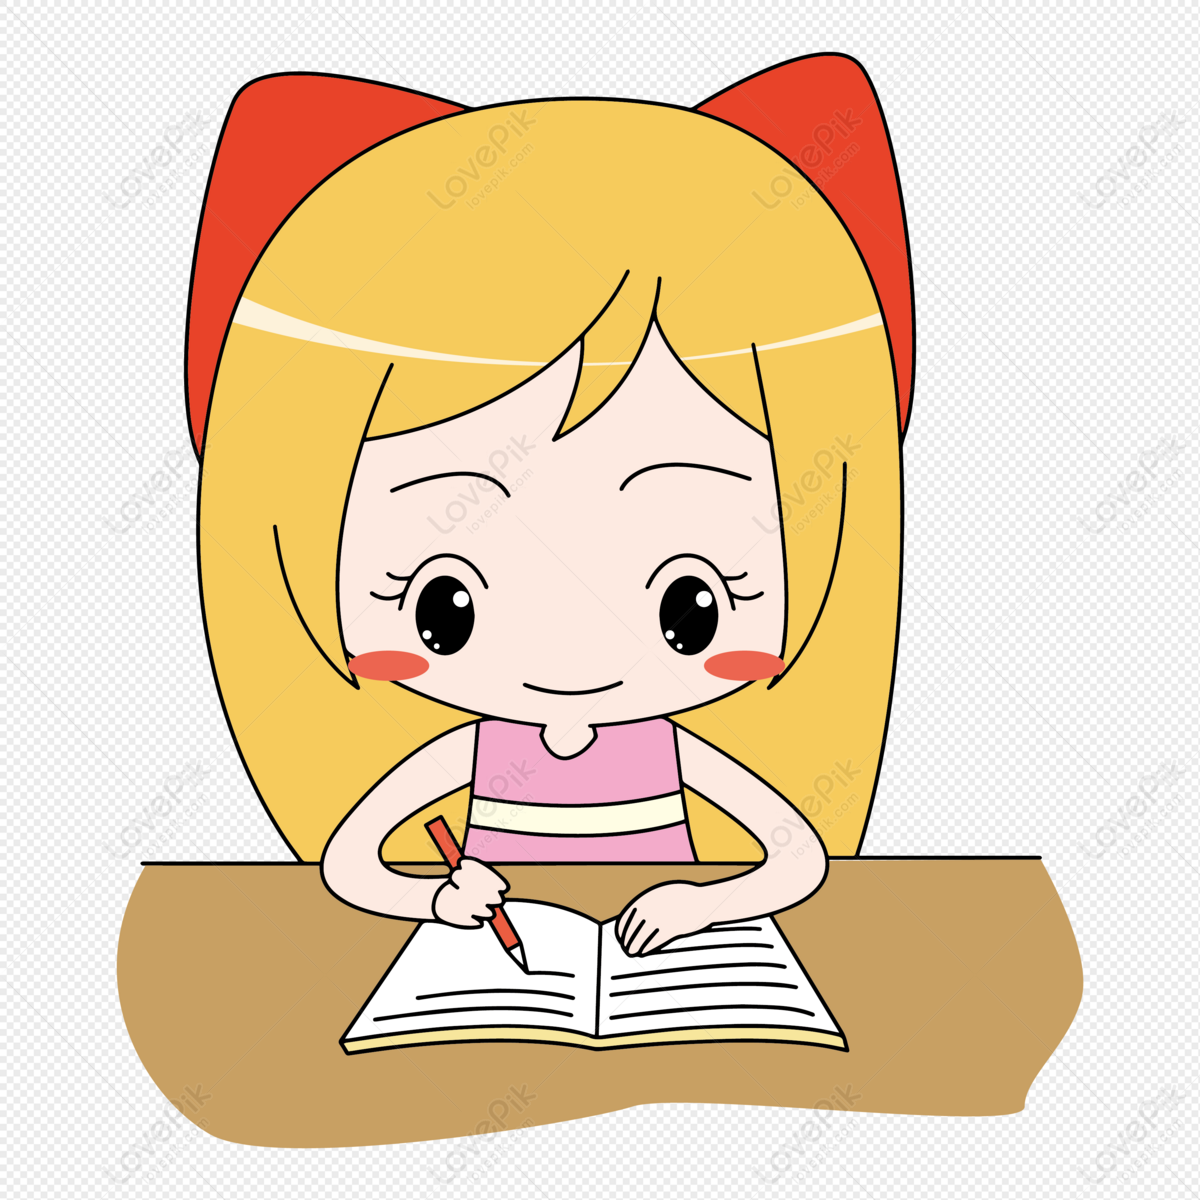 Girl who writes homework seriously during the school quarter, q version girl, and homework, quarter png hd transparent image